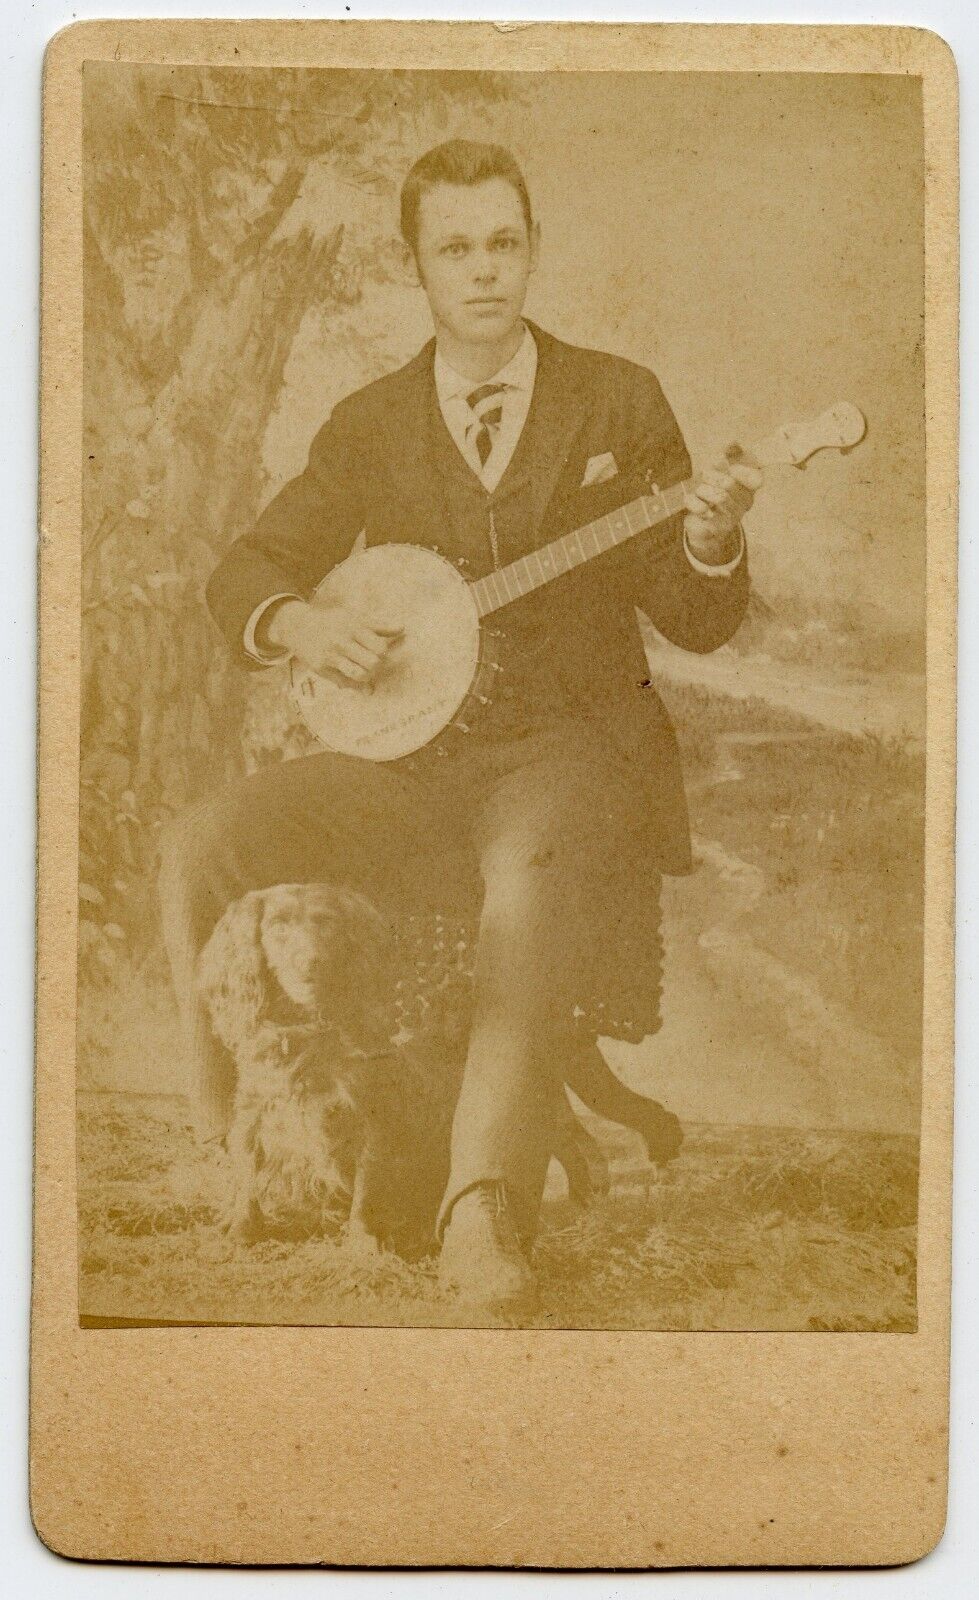 Man Playing Banjo , Dog under chair Vintage Music CDV Photo by Loupret Lowell MA